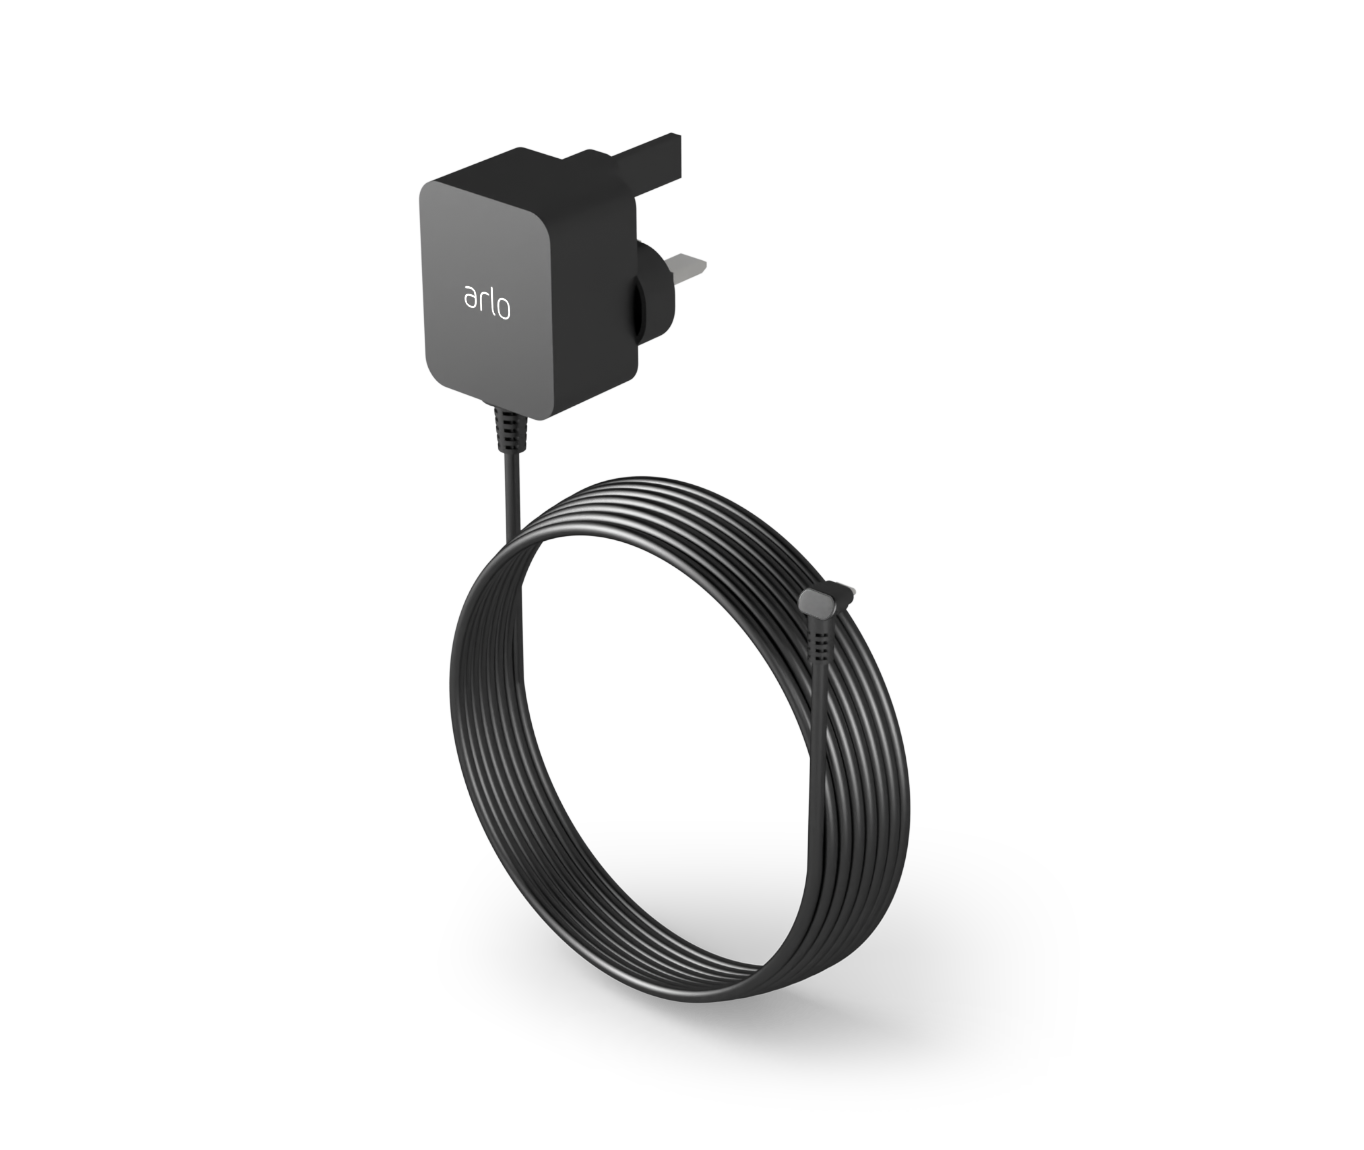 mus Oprigtighed kirurg Outdoor Power Cable and Adapter | Arlo Accessories Europe